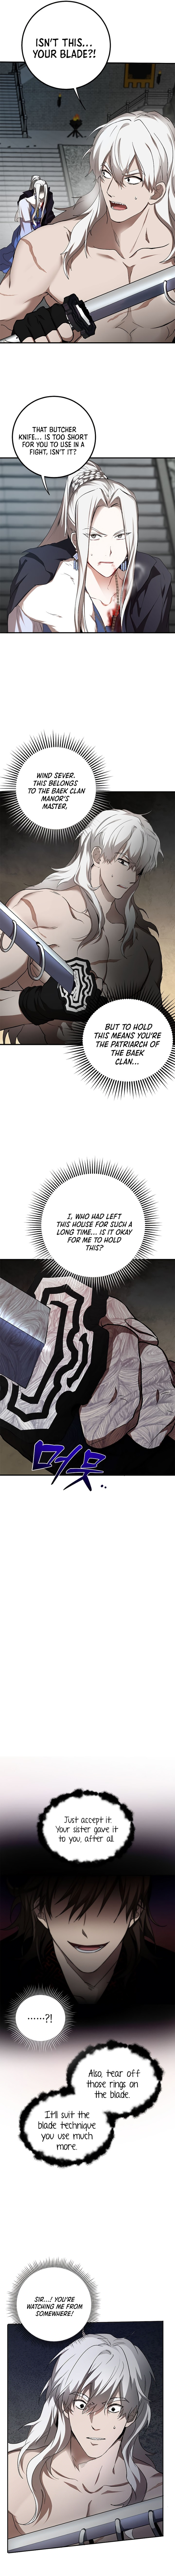 Path of the Shaman - Chapter 93 Page 4